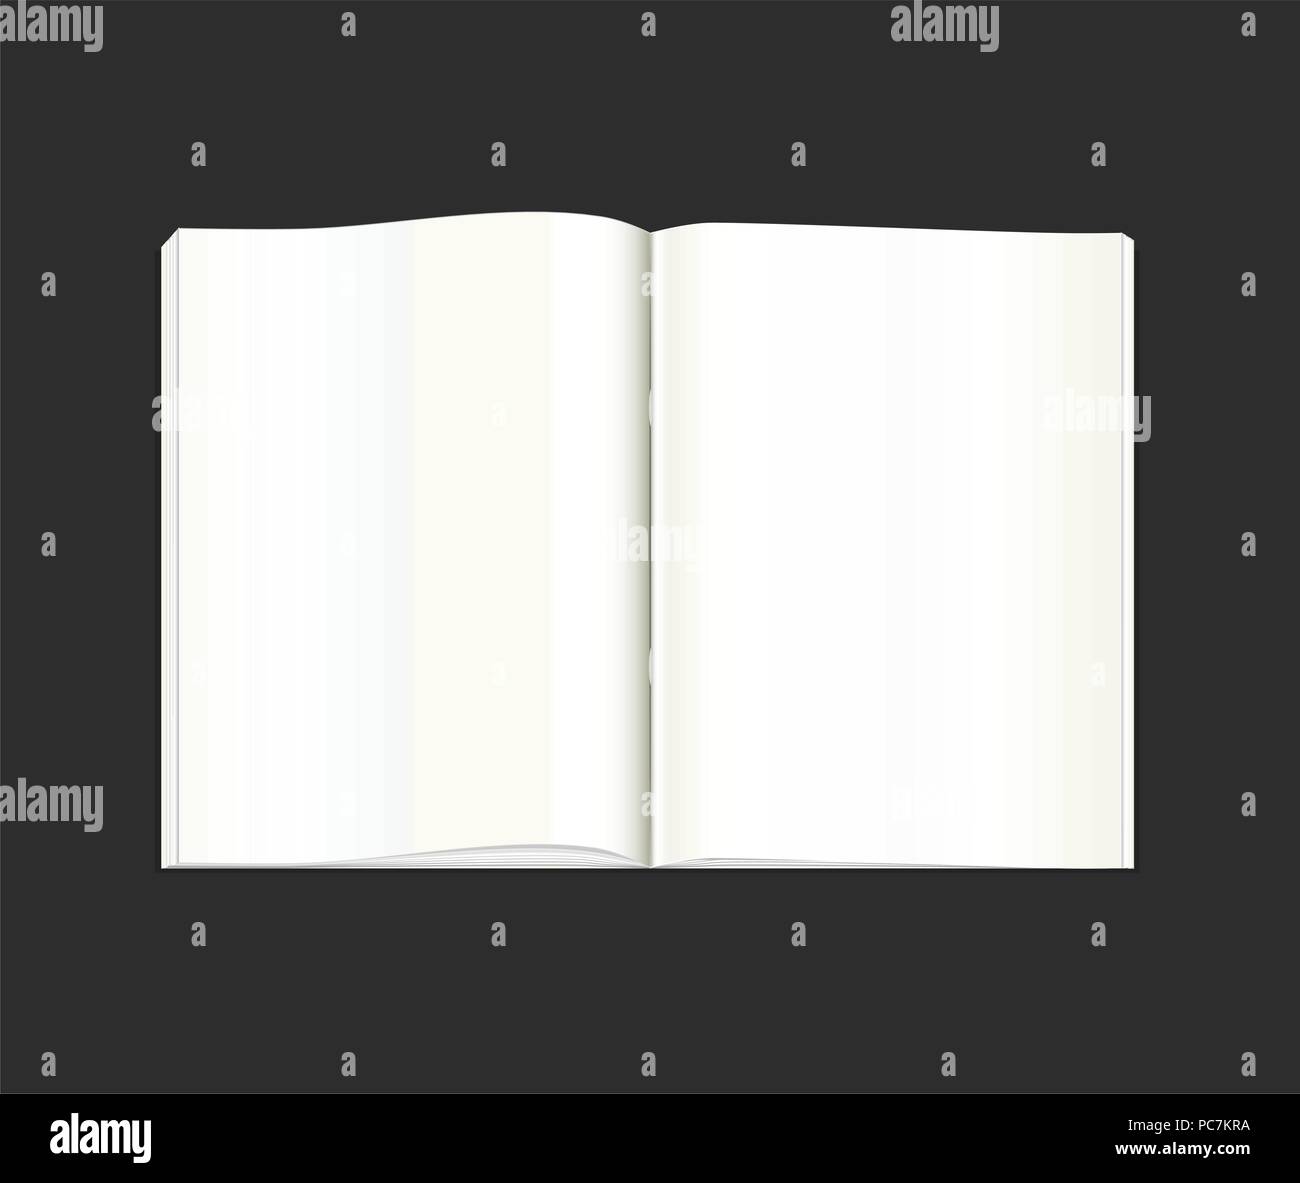 Vector. Stationery. An open pocket book, diary, notebook, scrapbook, textbook, notepad, organizer, sketch book, journal, drawing pad. Isolated illustration. White blank pages. Stock Vector